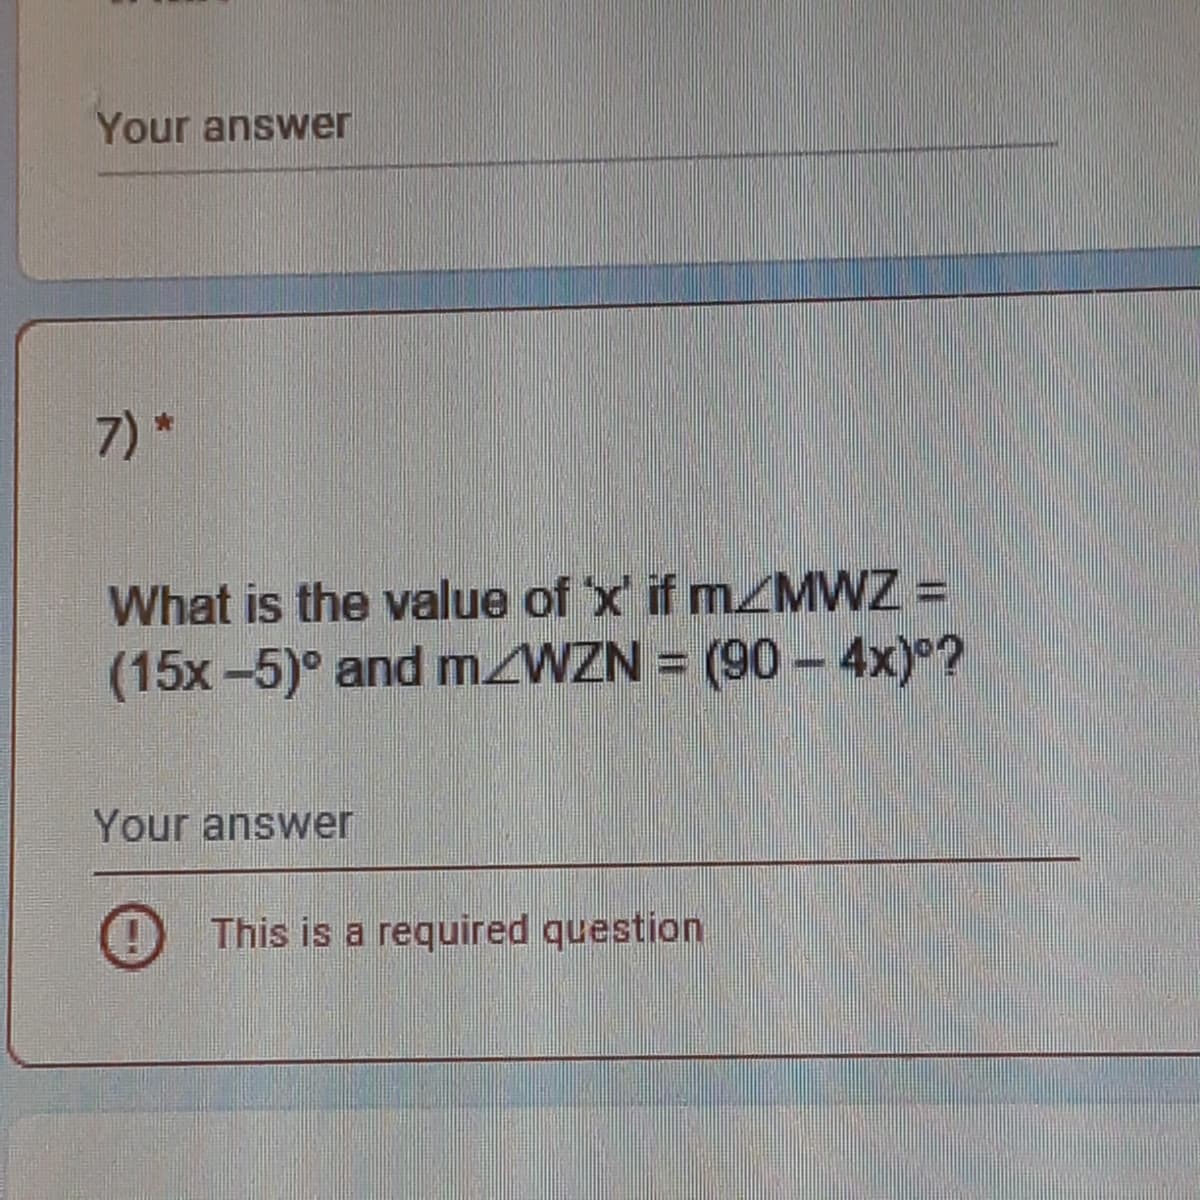 Your answer
7) *
What is the value of x if MZMWZ =
(15x -5)° and m/WZN = (90 - 4x)°?
Your answer
This is a required question
